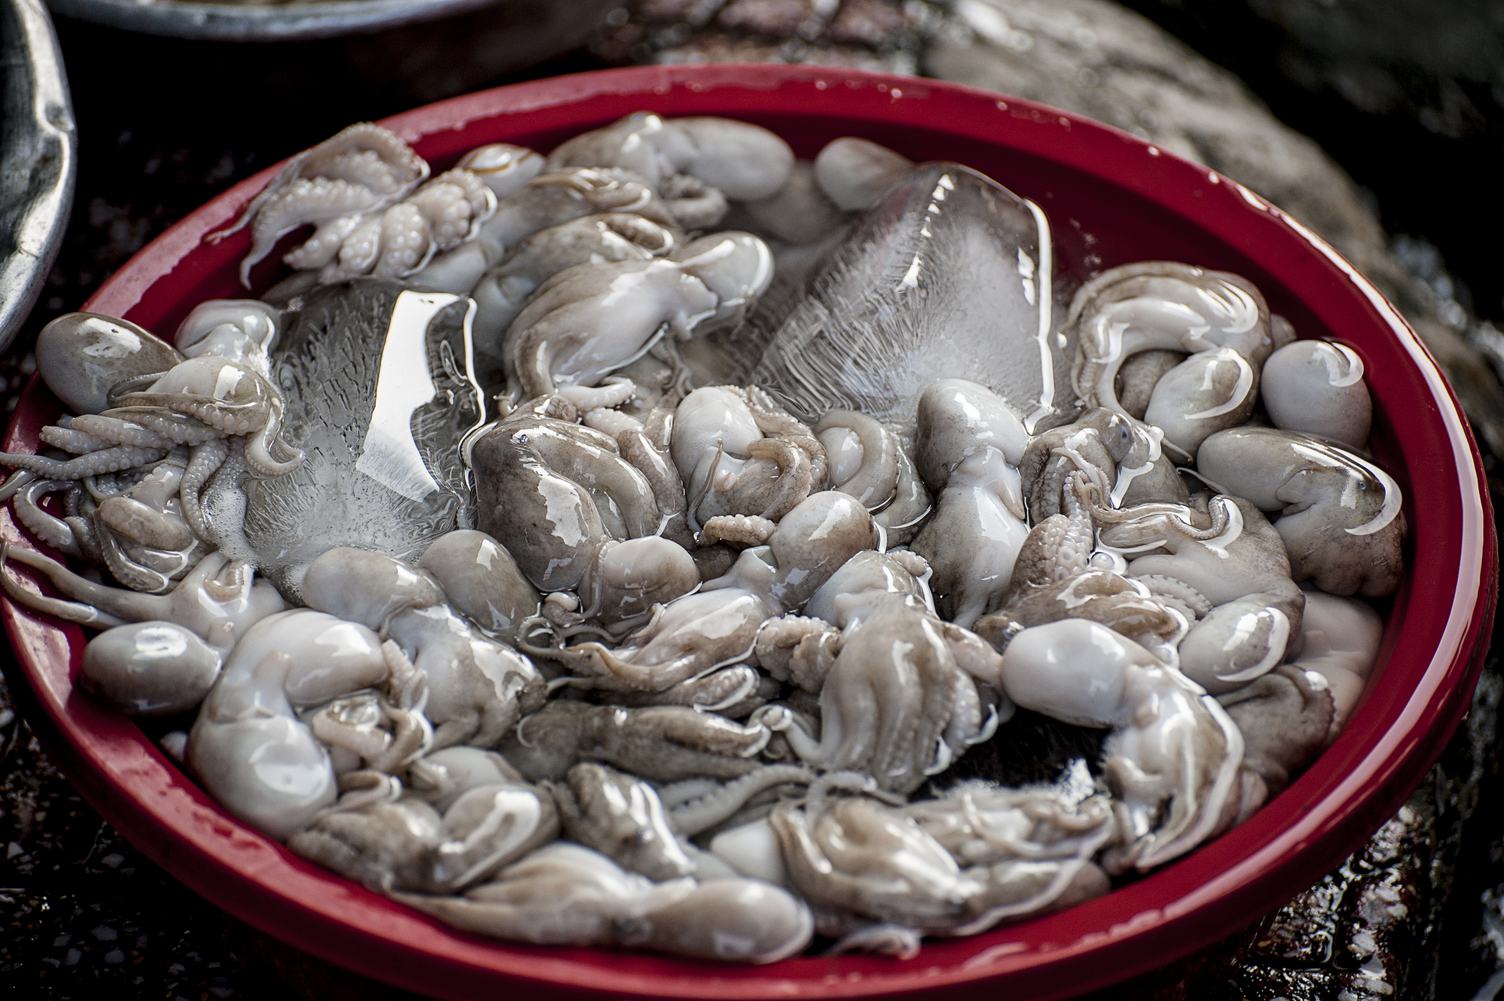 Fresh Squid in the Bowl for Sell at the Market